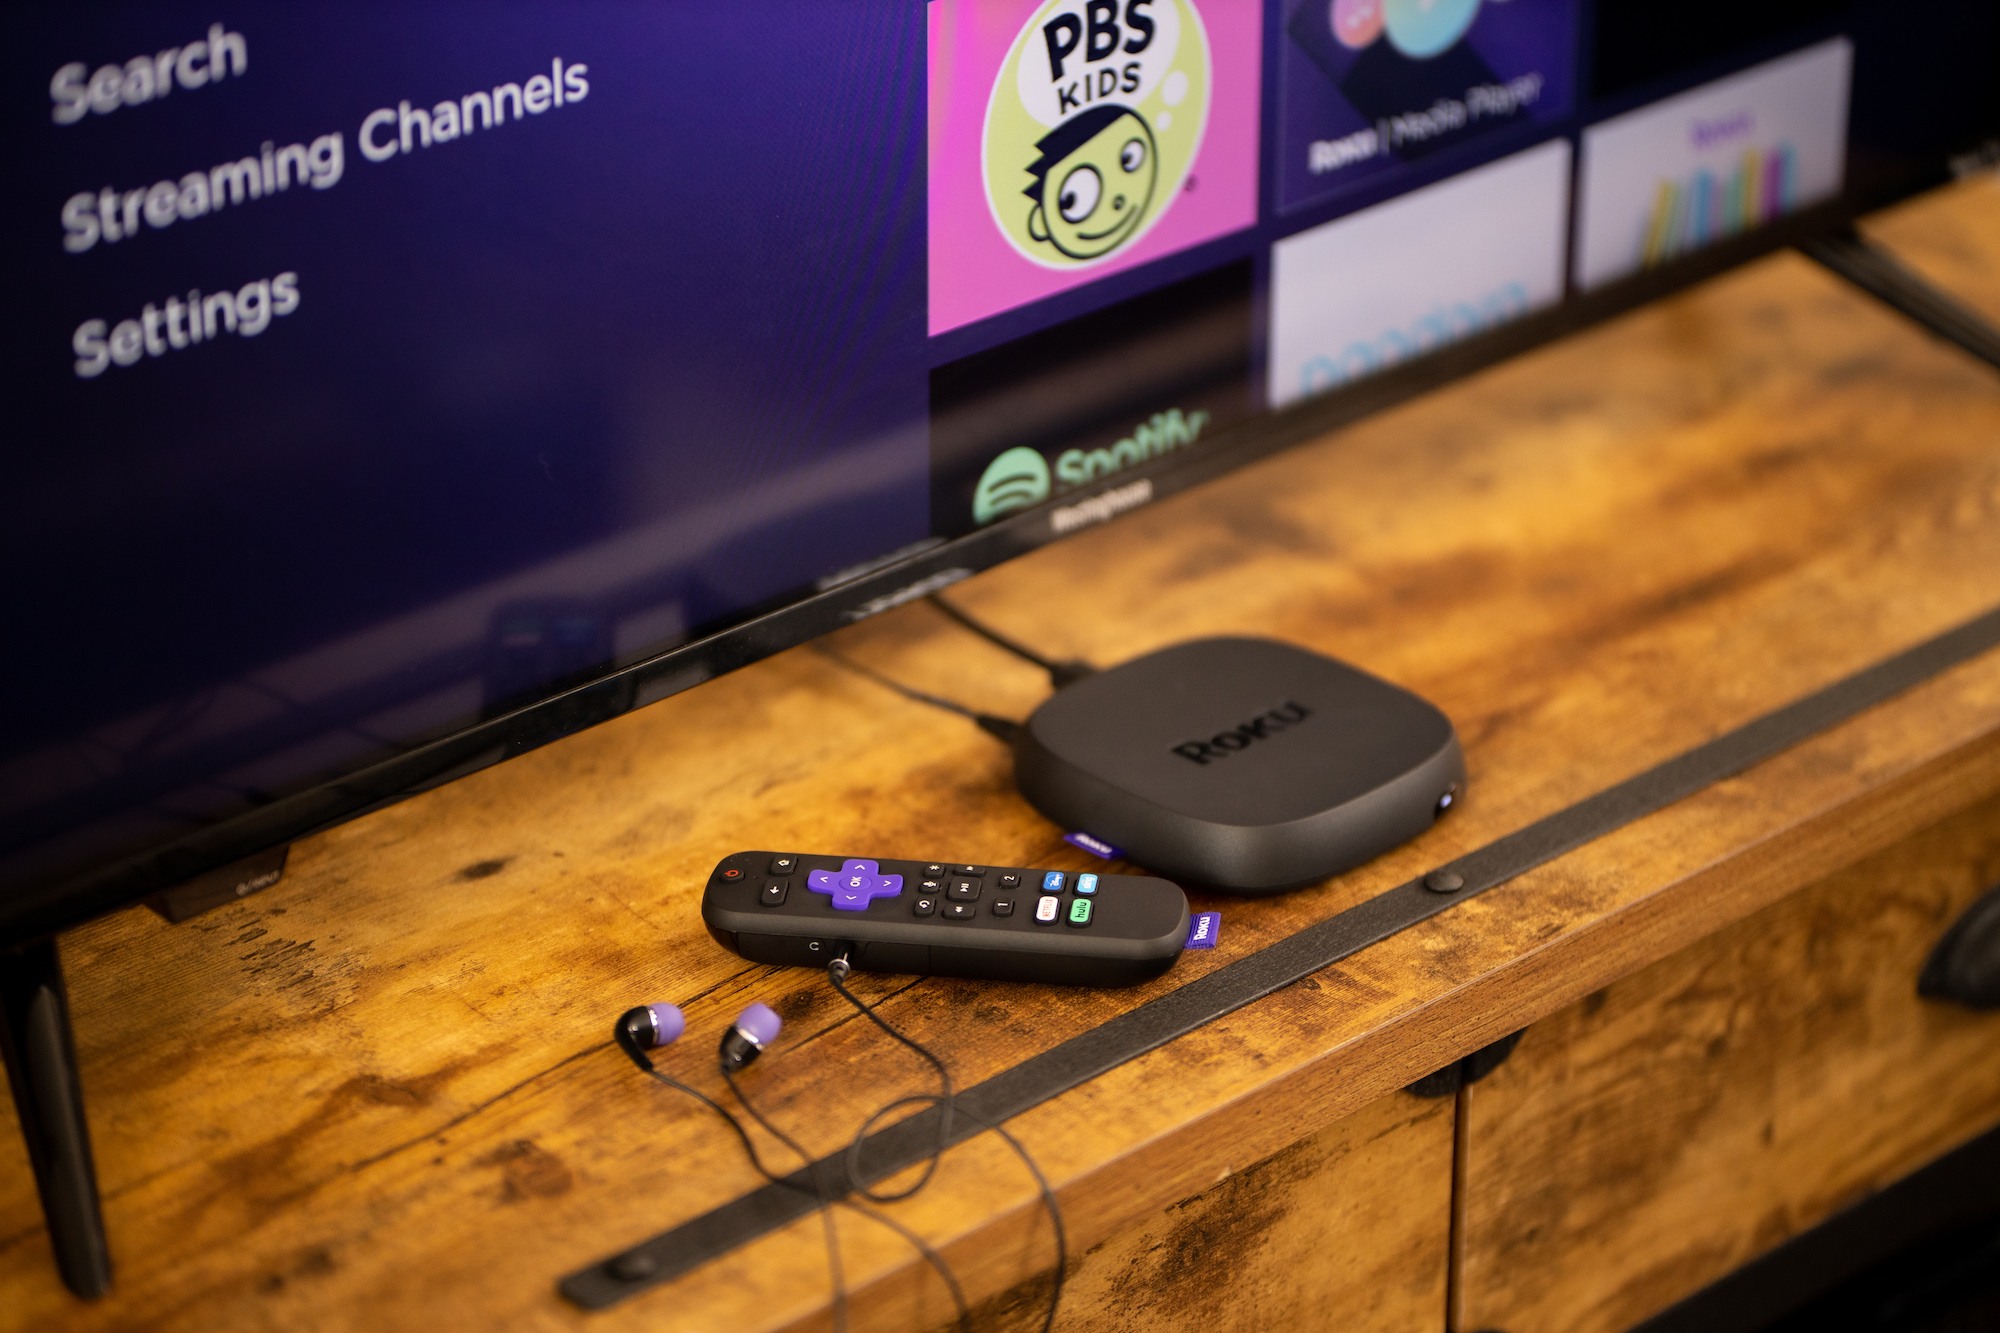 New Roku Ultra is Best New Streaming Player of the Year (Cordie Awards 2020)